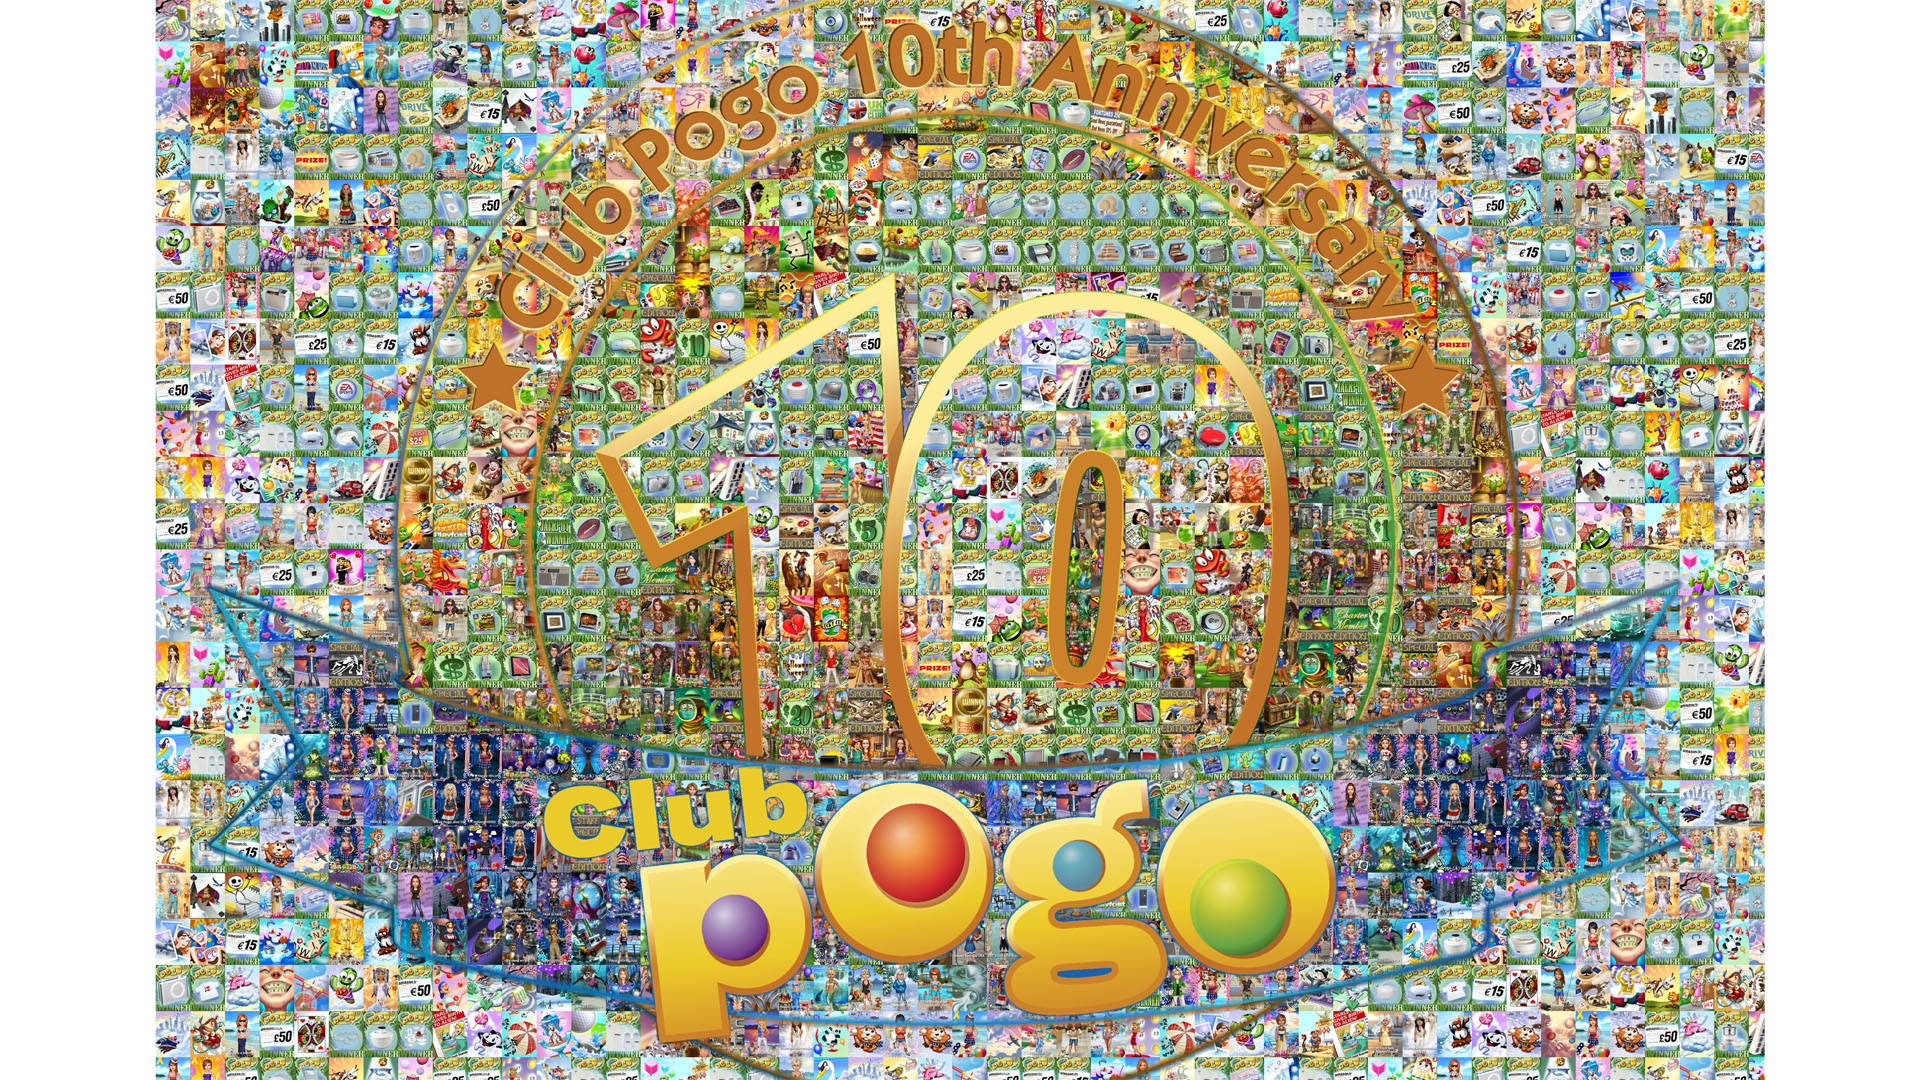 Club Pogo Year Anniversary Art Project Revealed